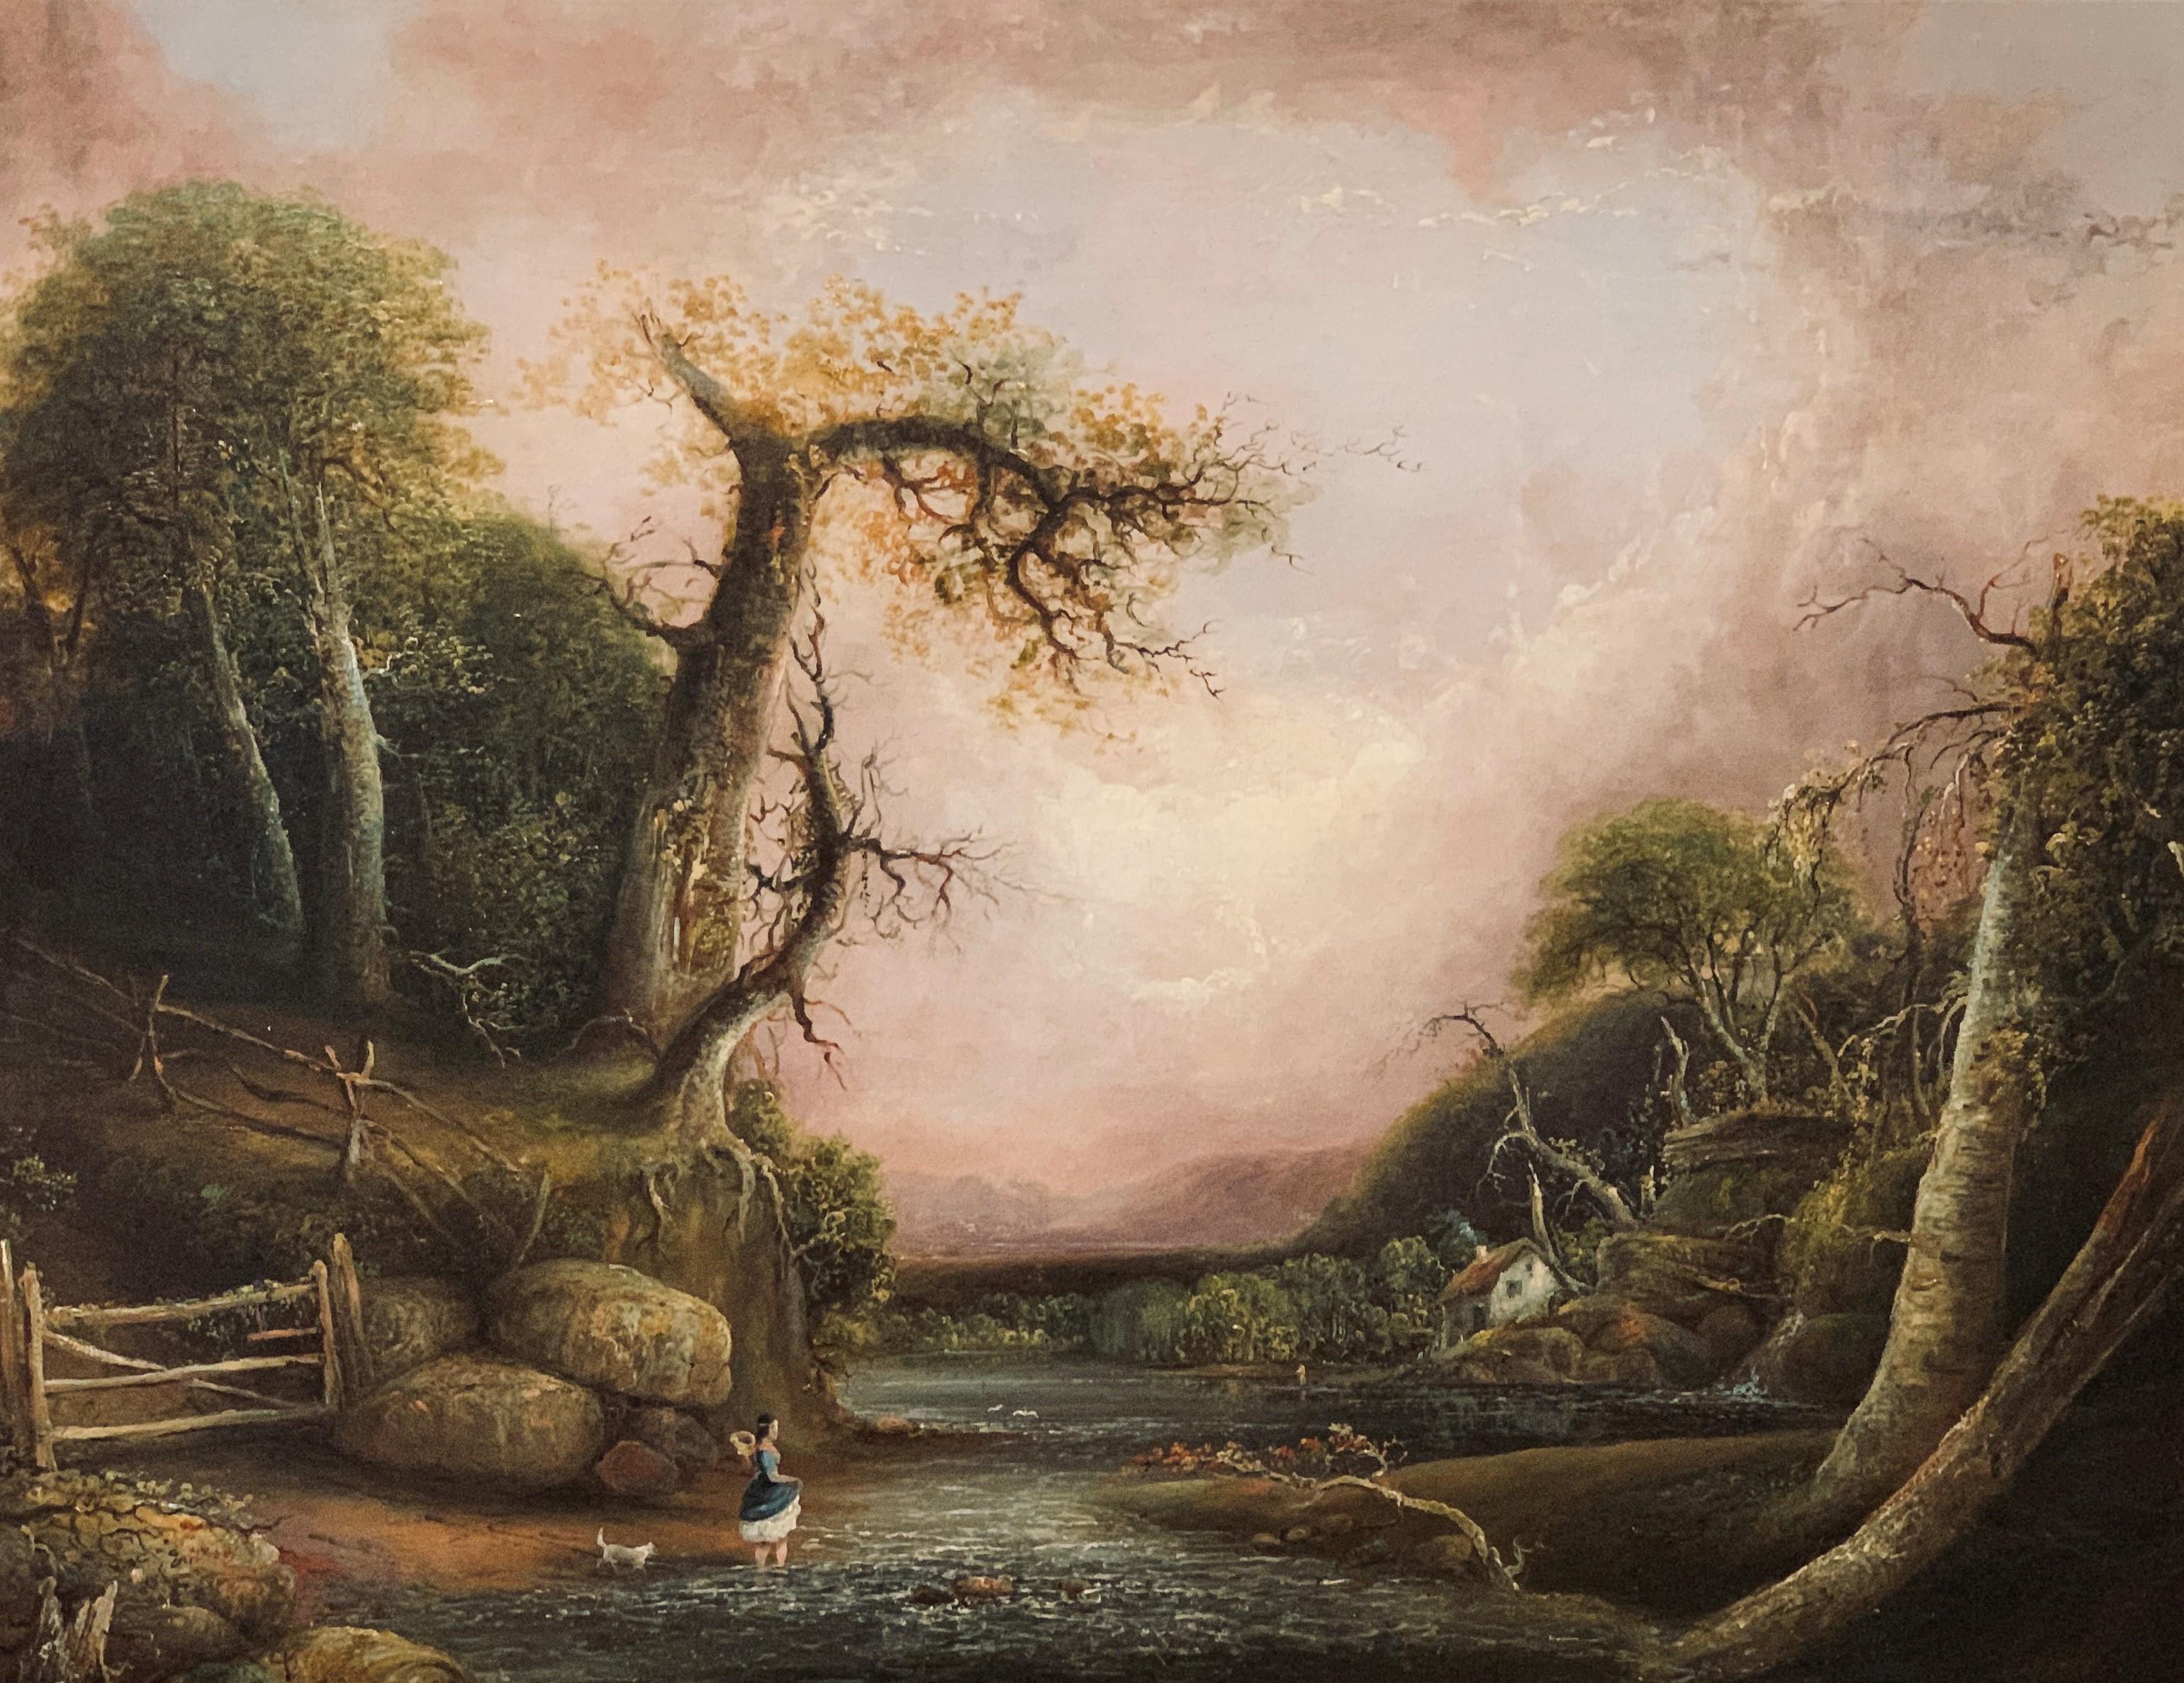 American School Romantic Landscape, circa 1845-50. - Painting by Unknown